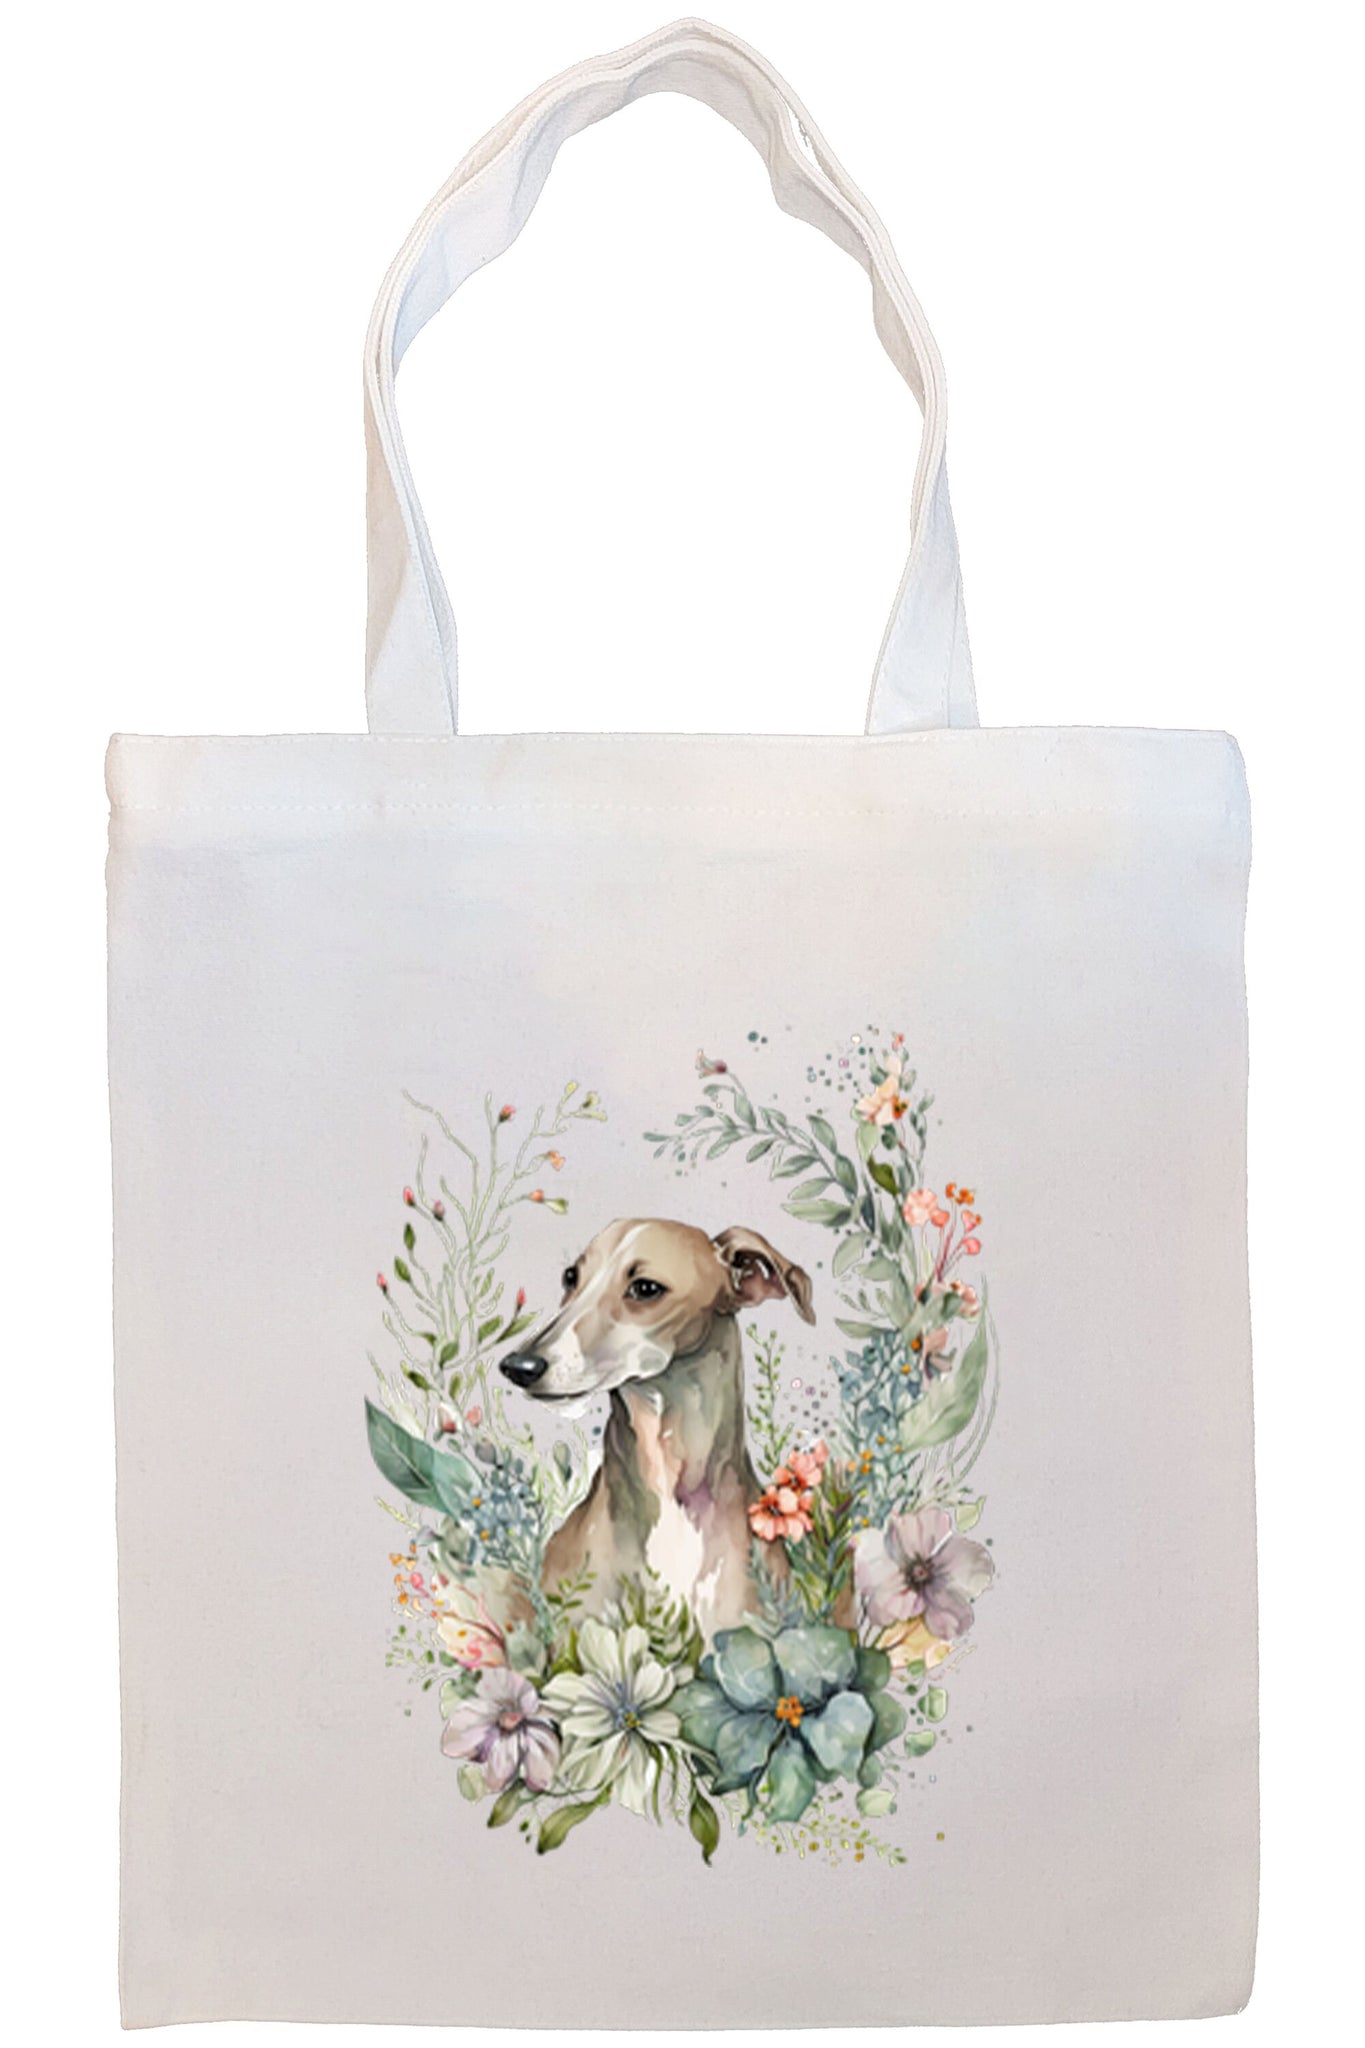 Canvas Tote Bag, Zippered With Handles & Inner Pocket, "Whippet"